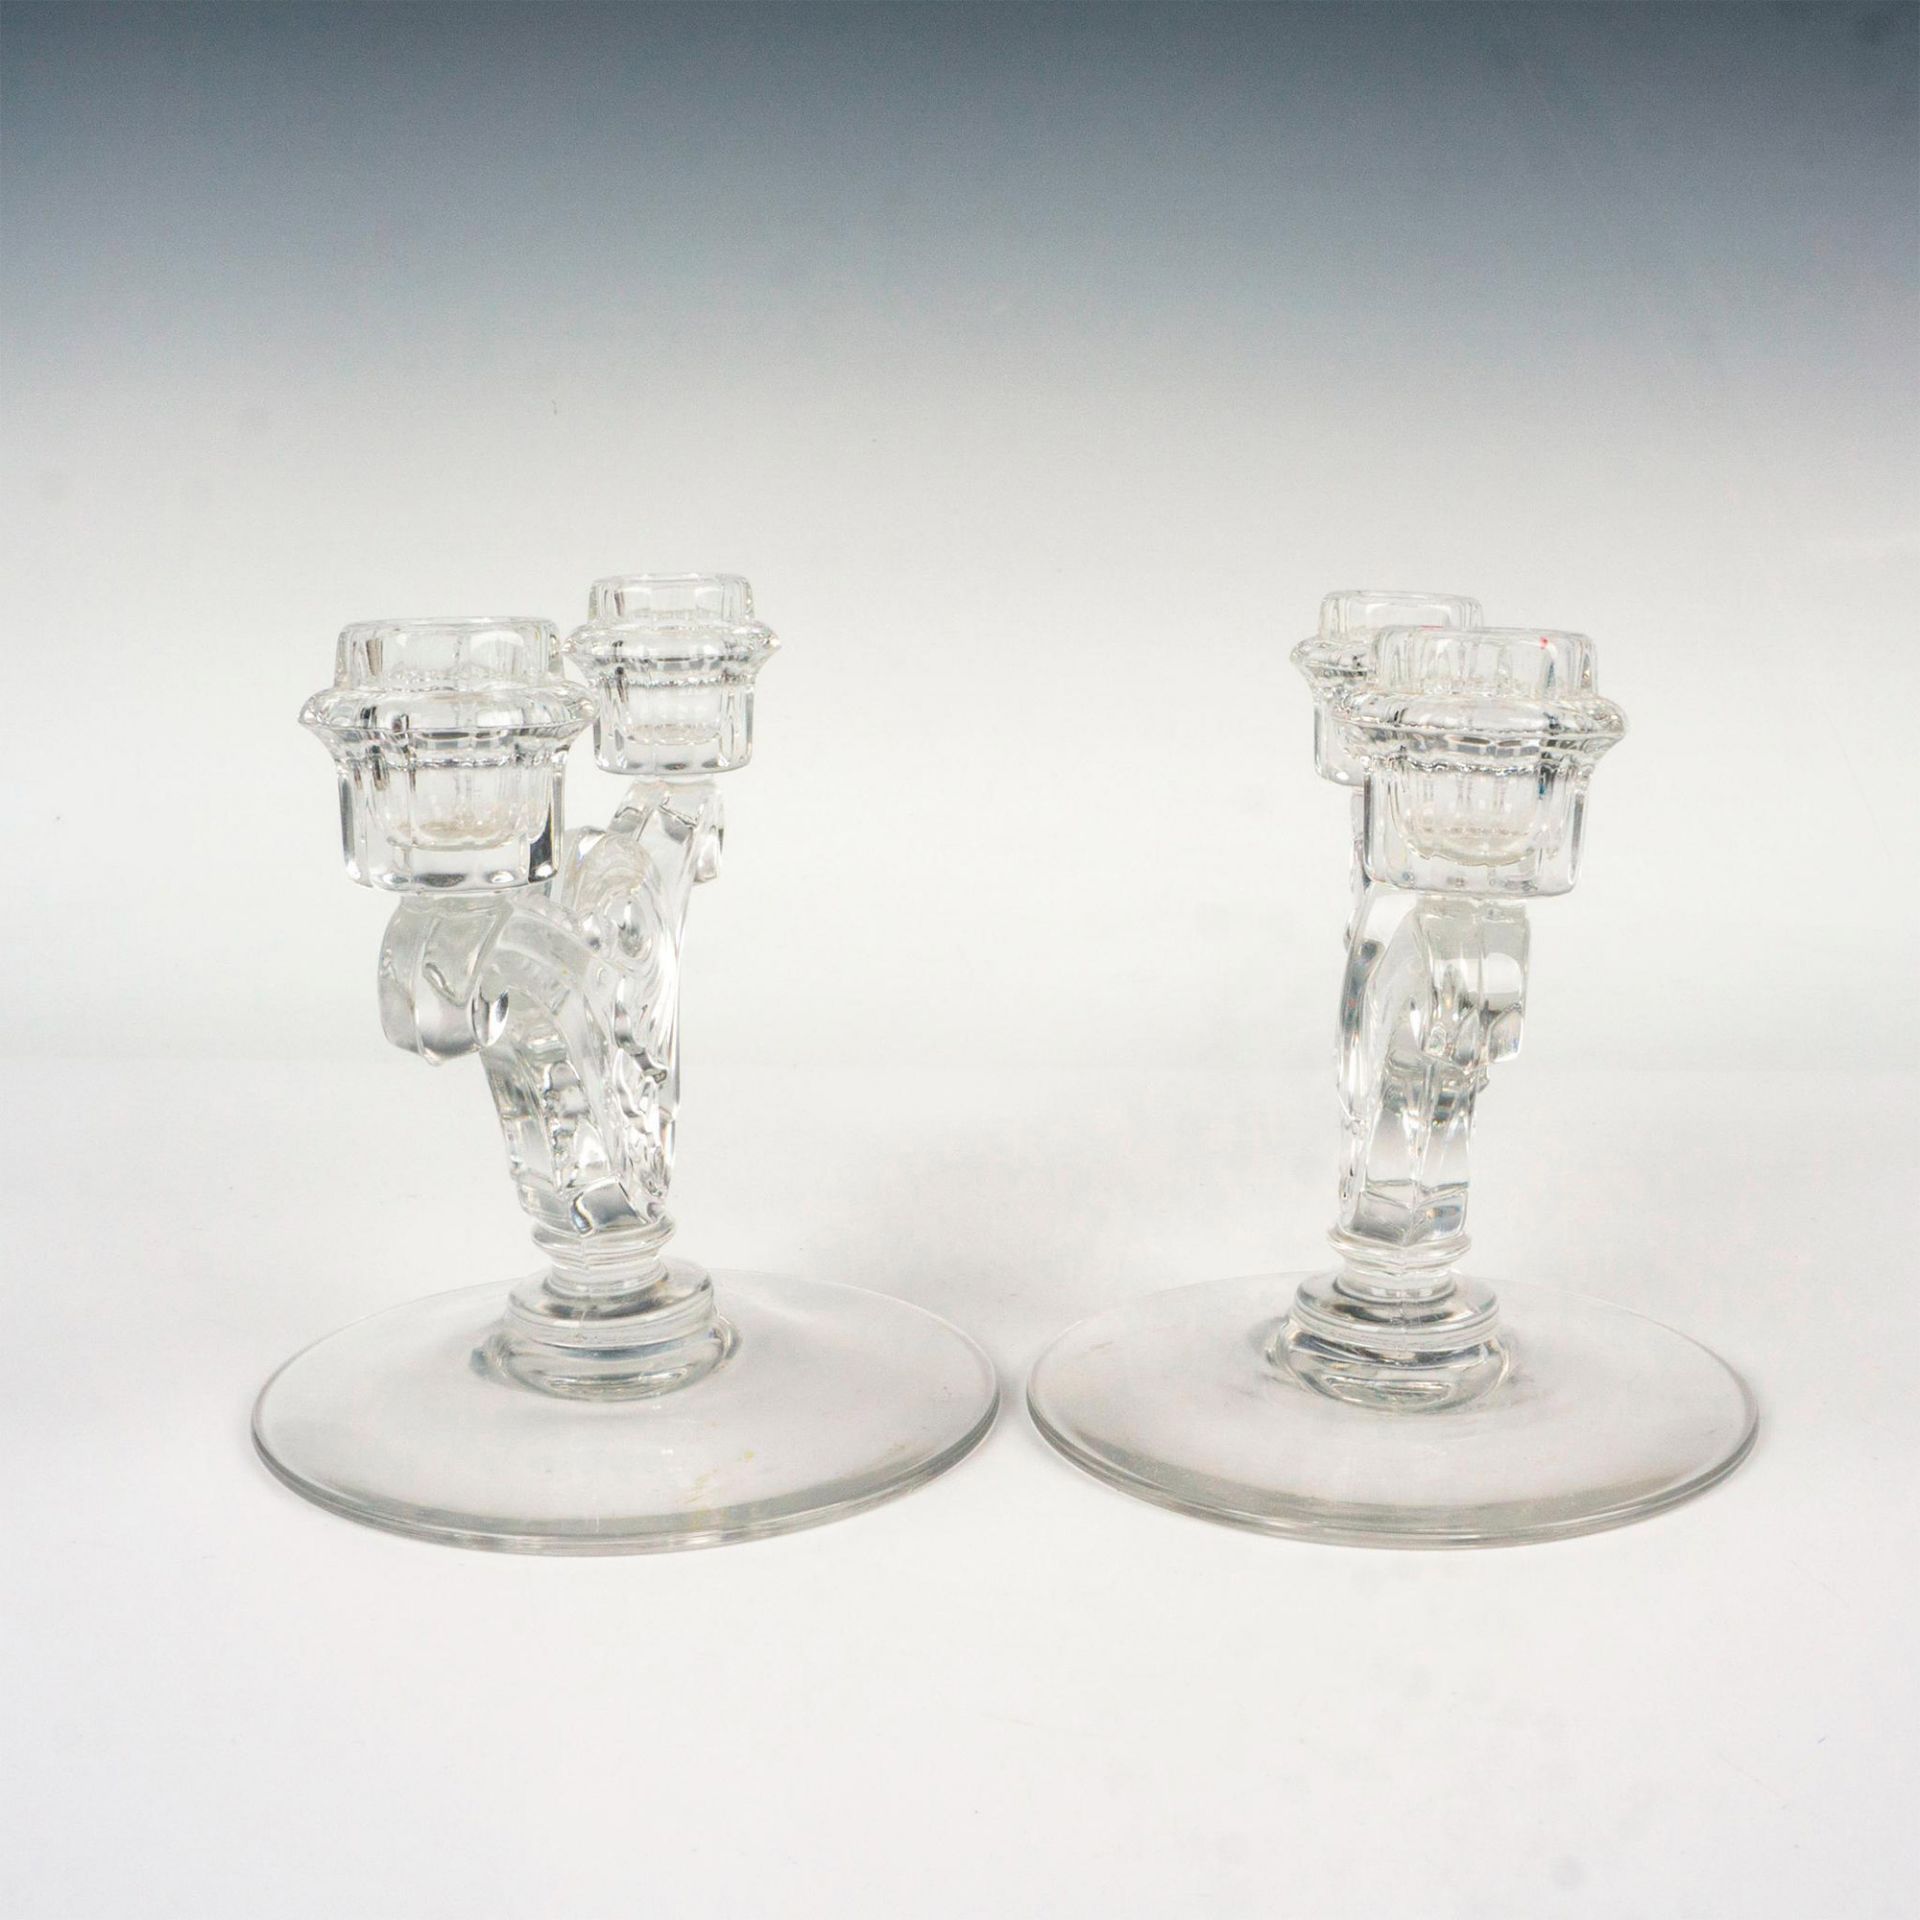 Pair of Heisey Double Candlestick Holders, Fern - Image 2 of 3